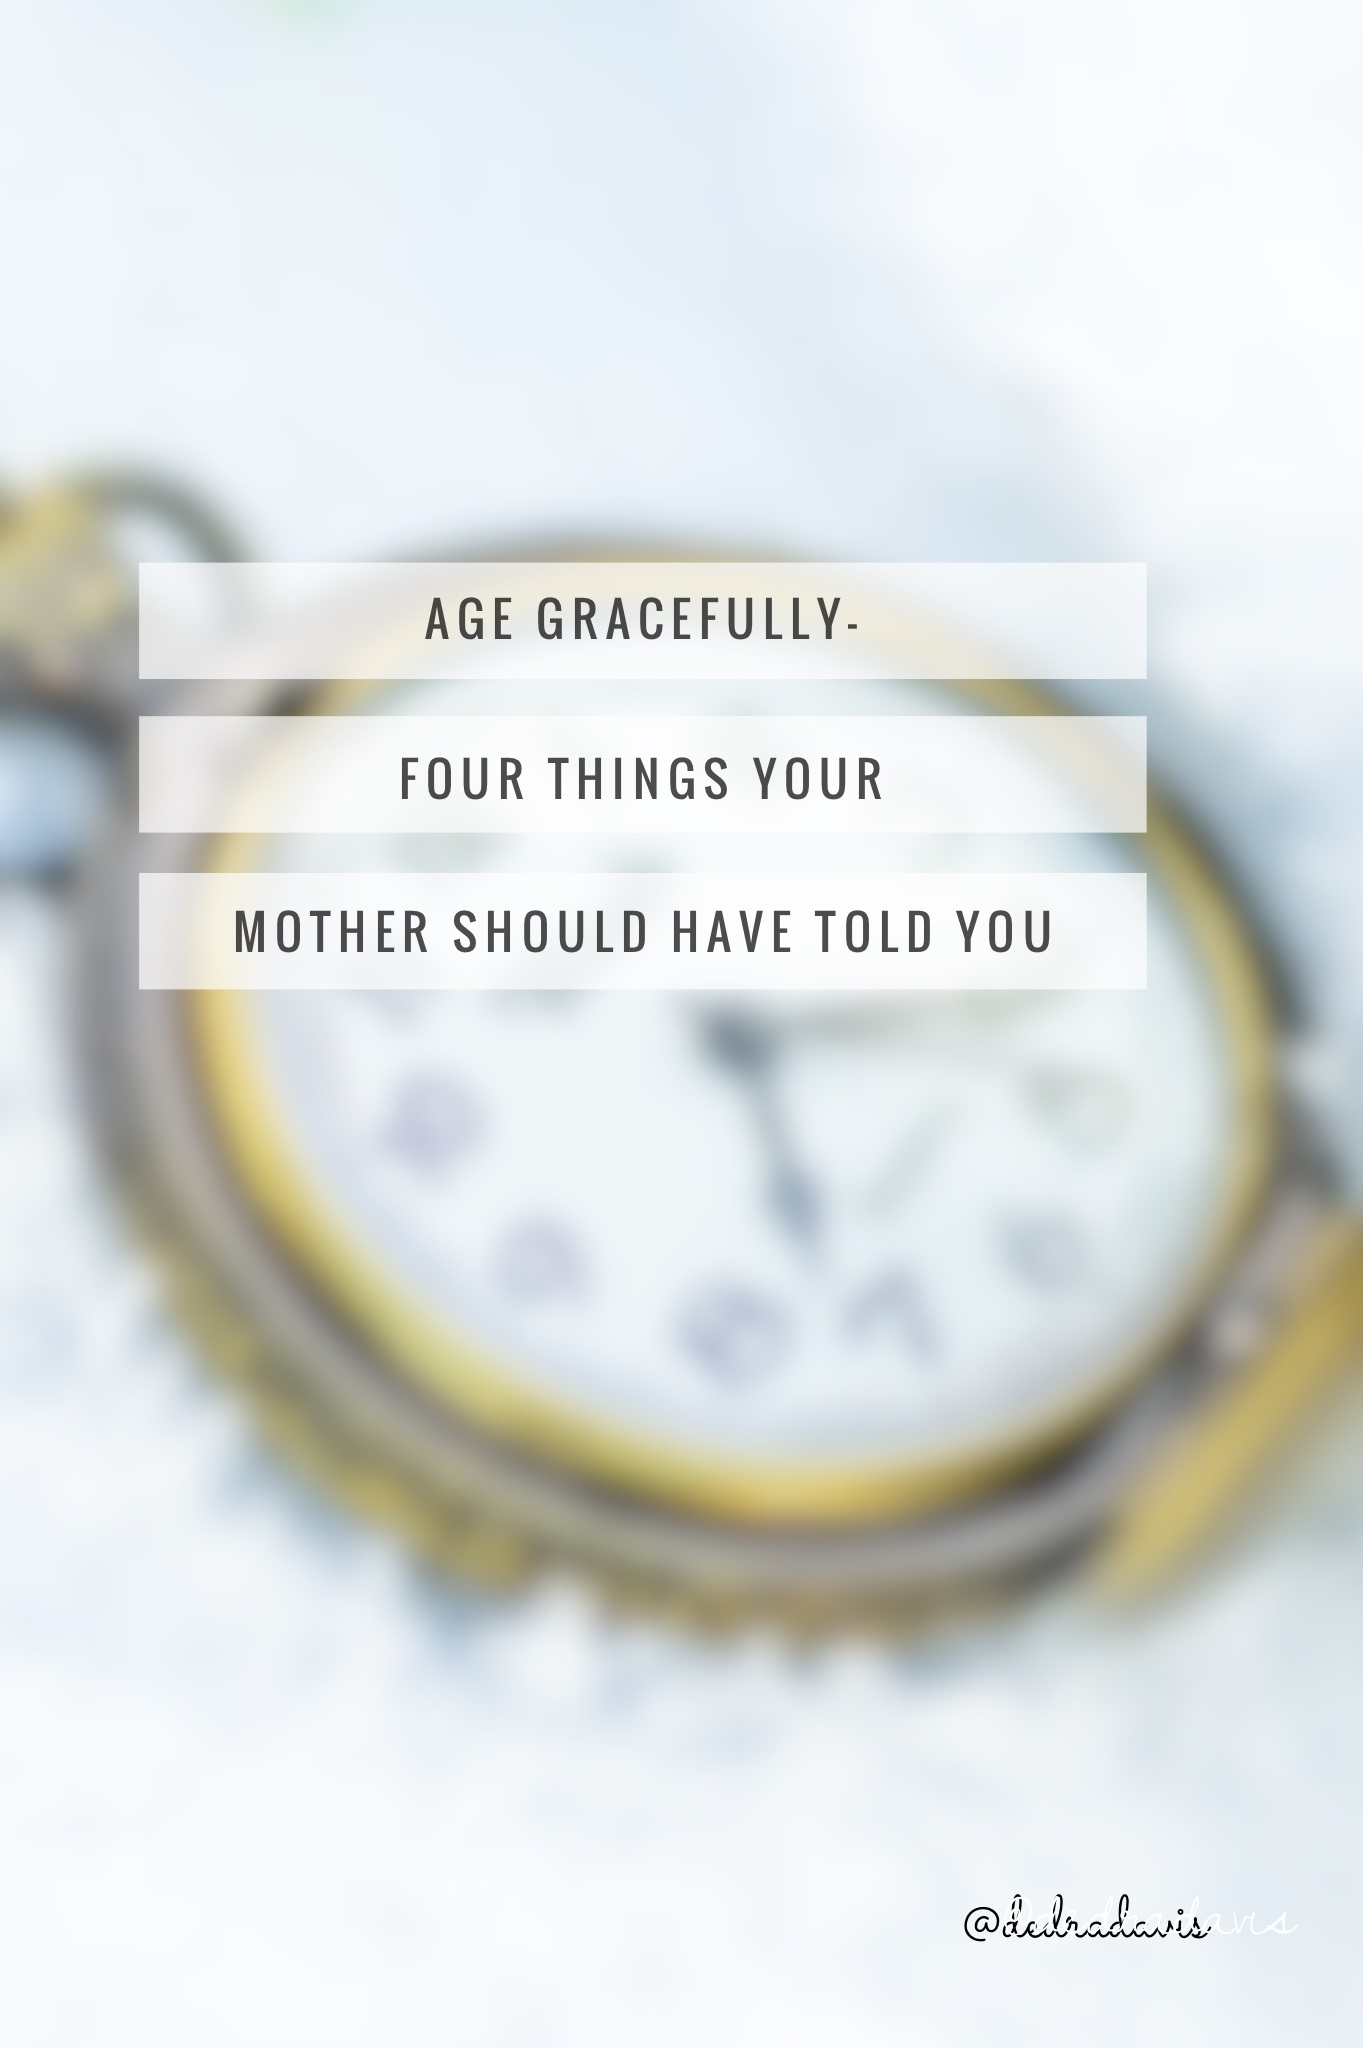 Age Gracefully-Four Things Your Mother Should Have Told You